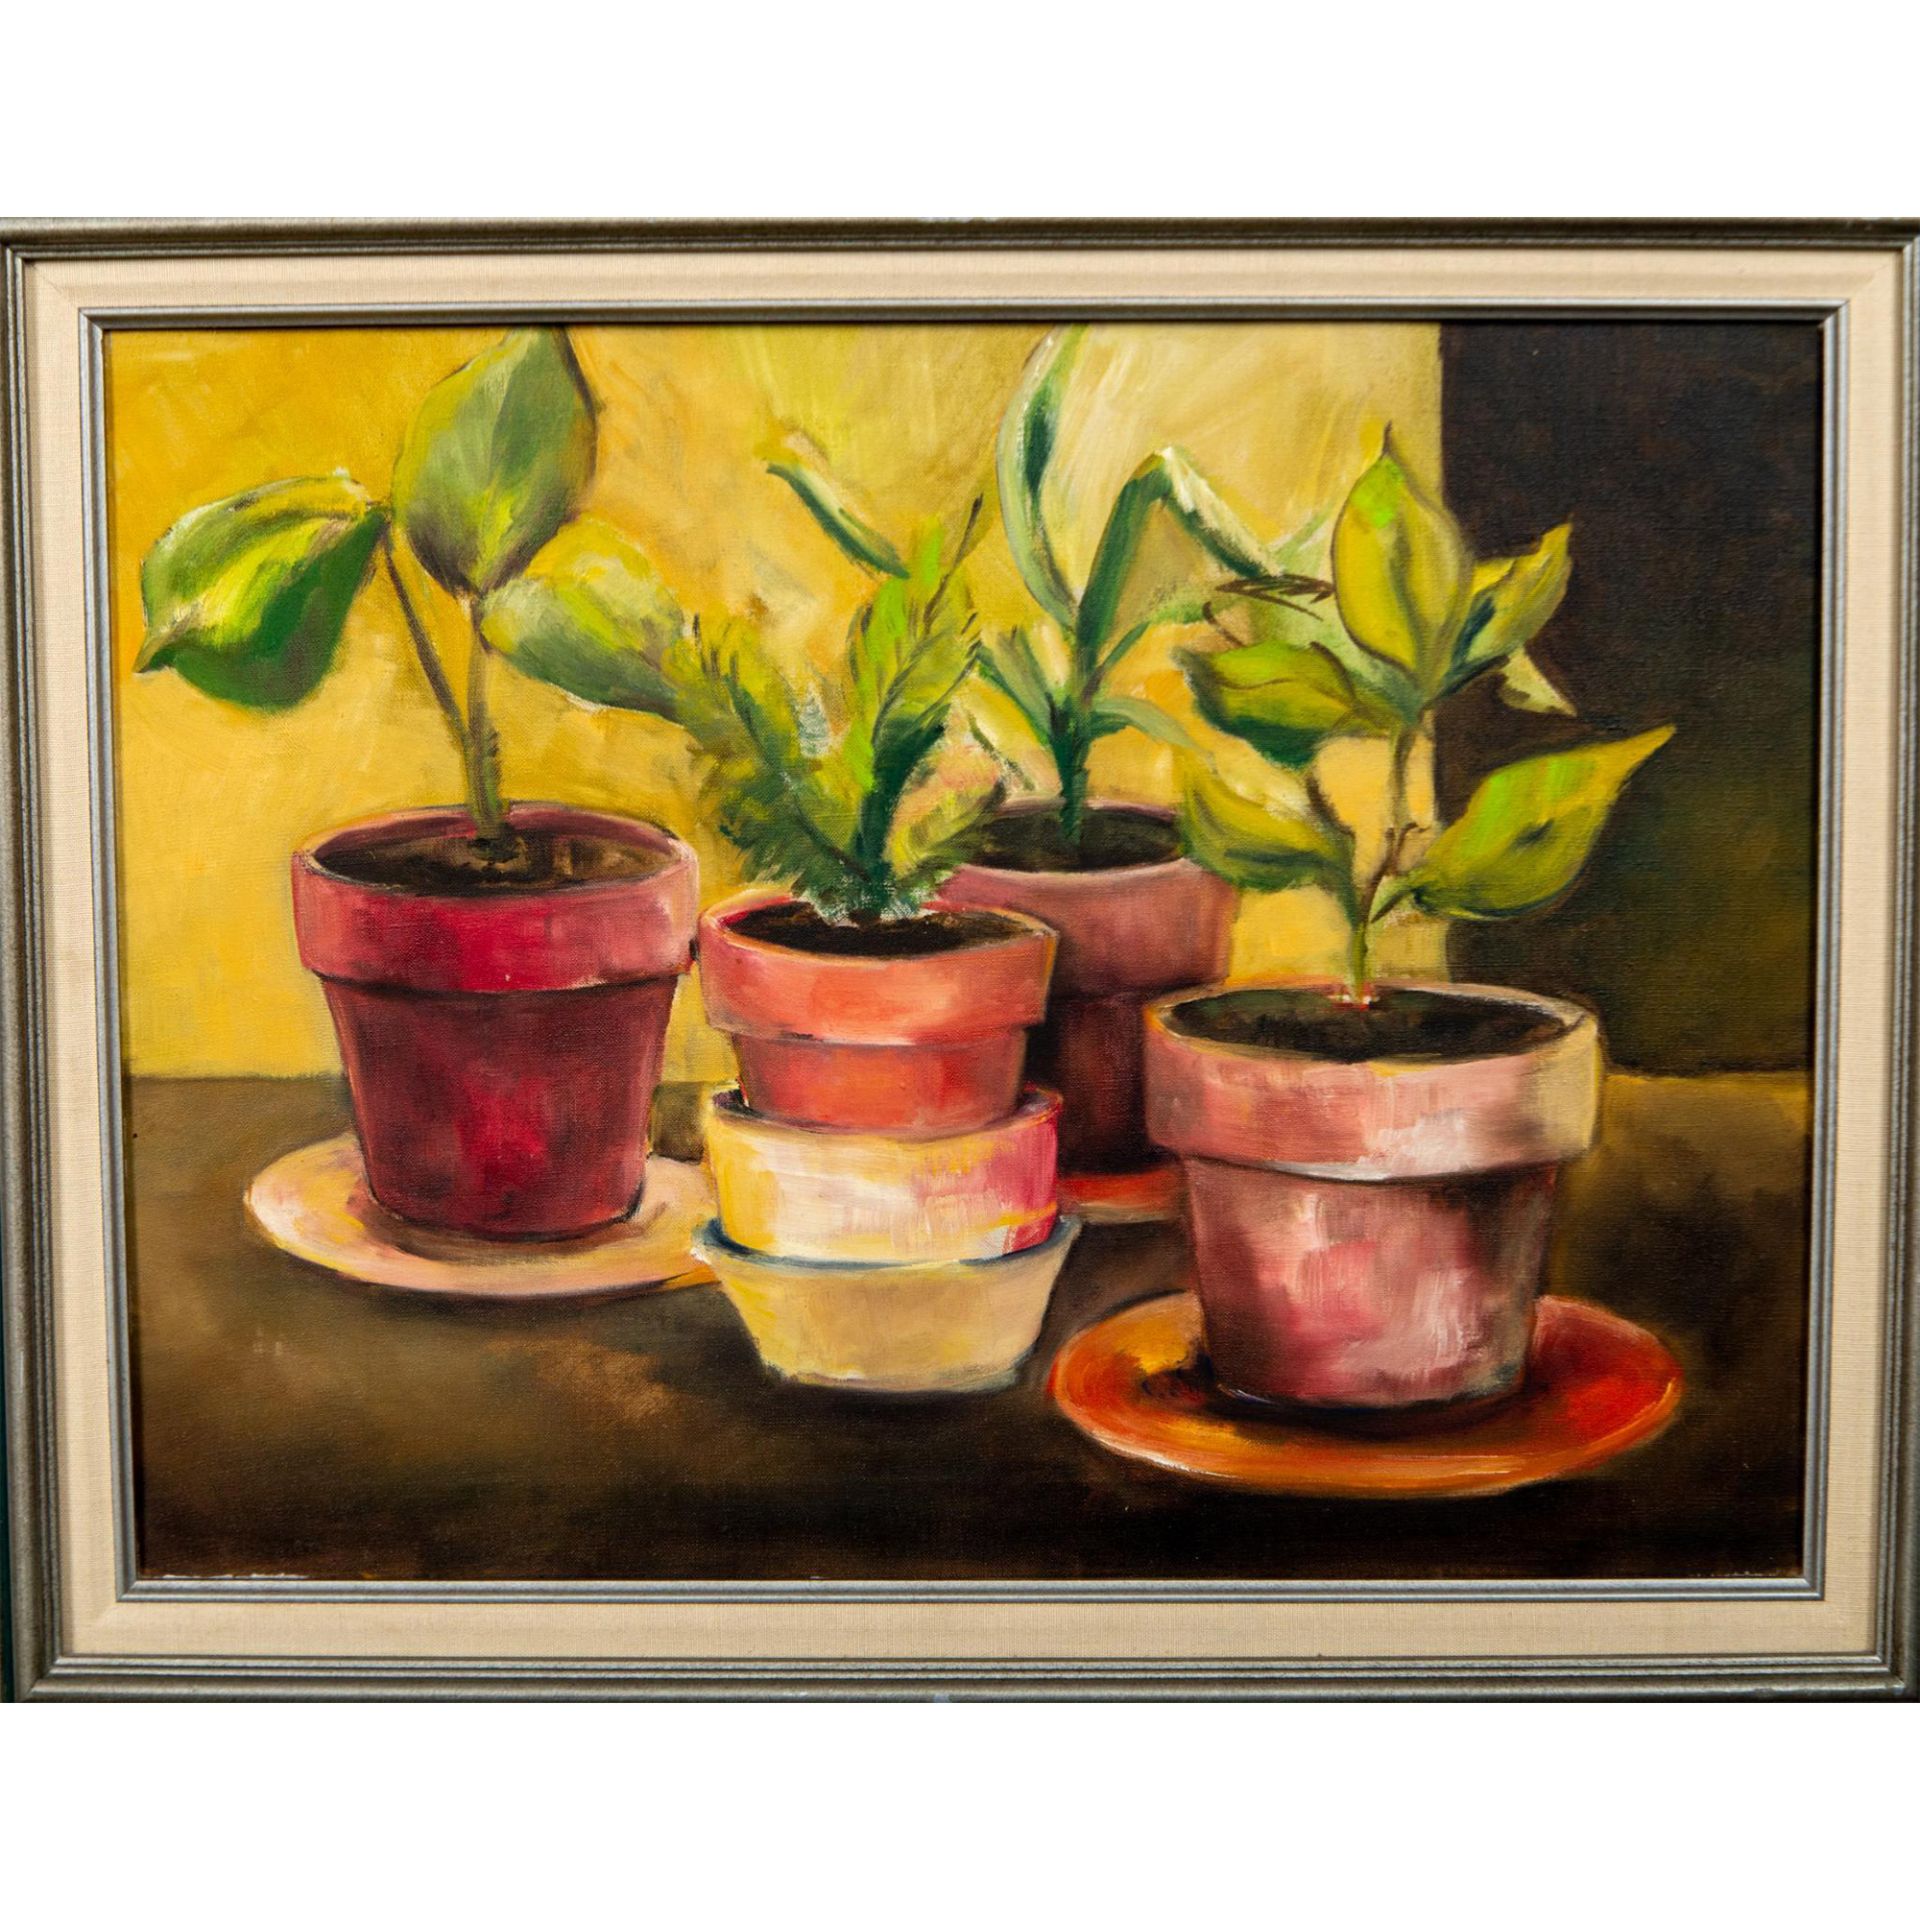 Vintage Oil Painting on Canvas, Still Life - Image 3 of 6